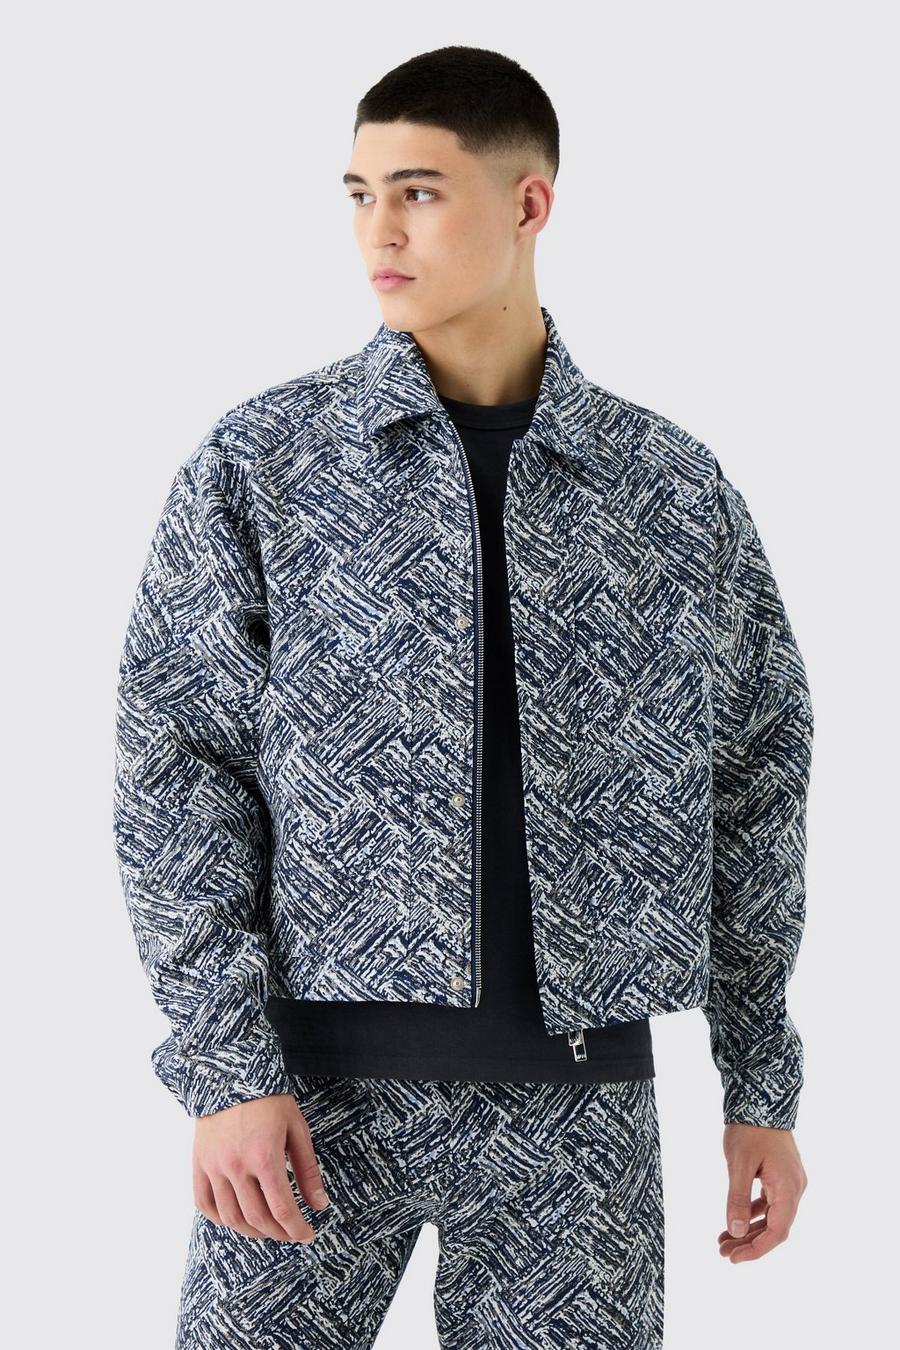 Blue Boxy Fit Fabric Interest Tapestry Jacket